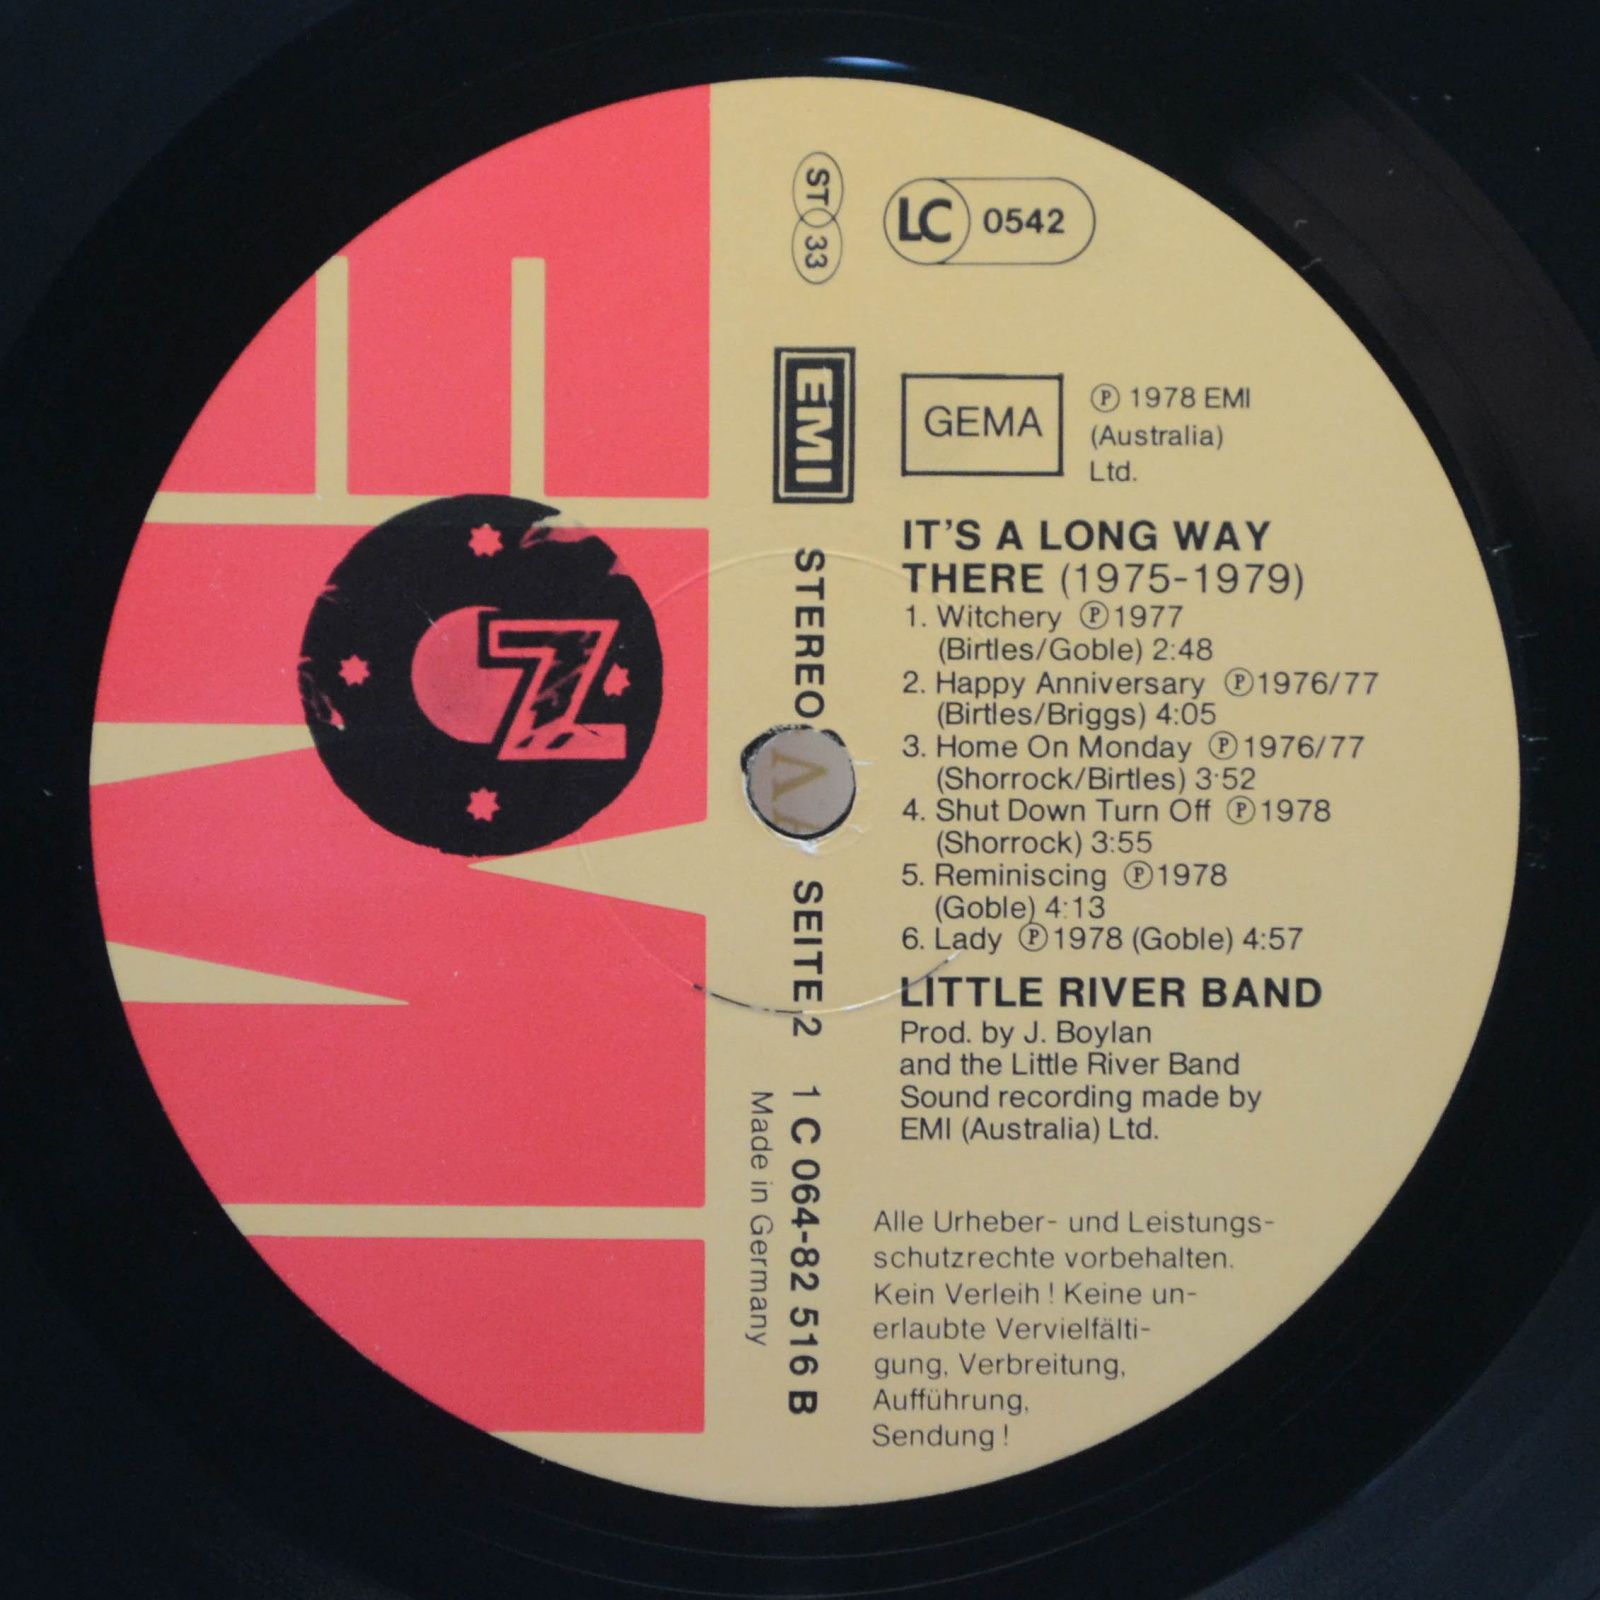 Little River Band — It's A Long Way There (1975-1979), 1978